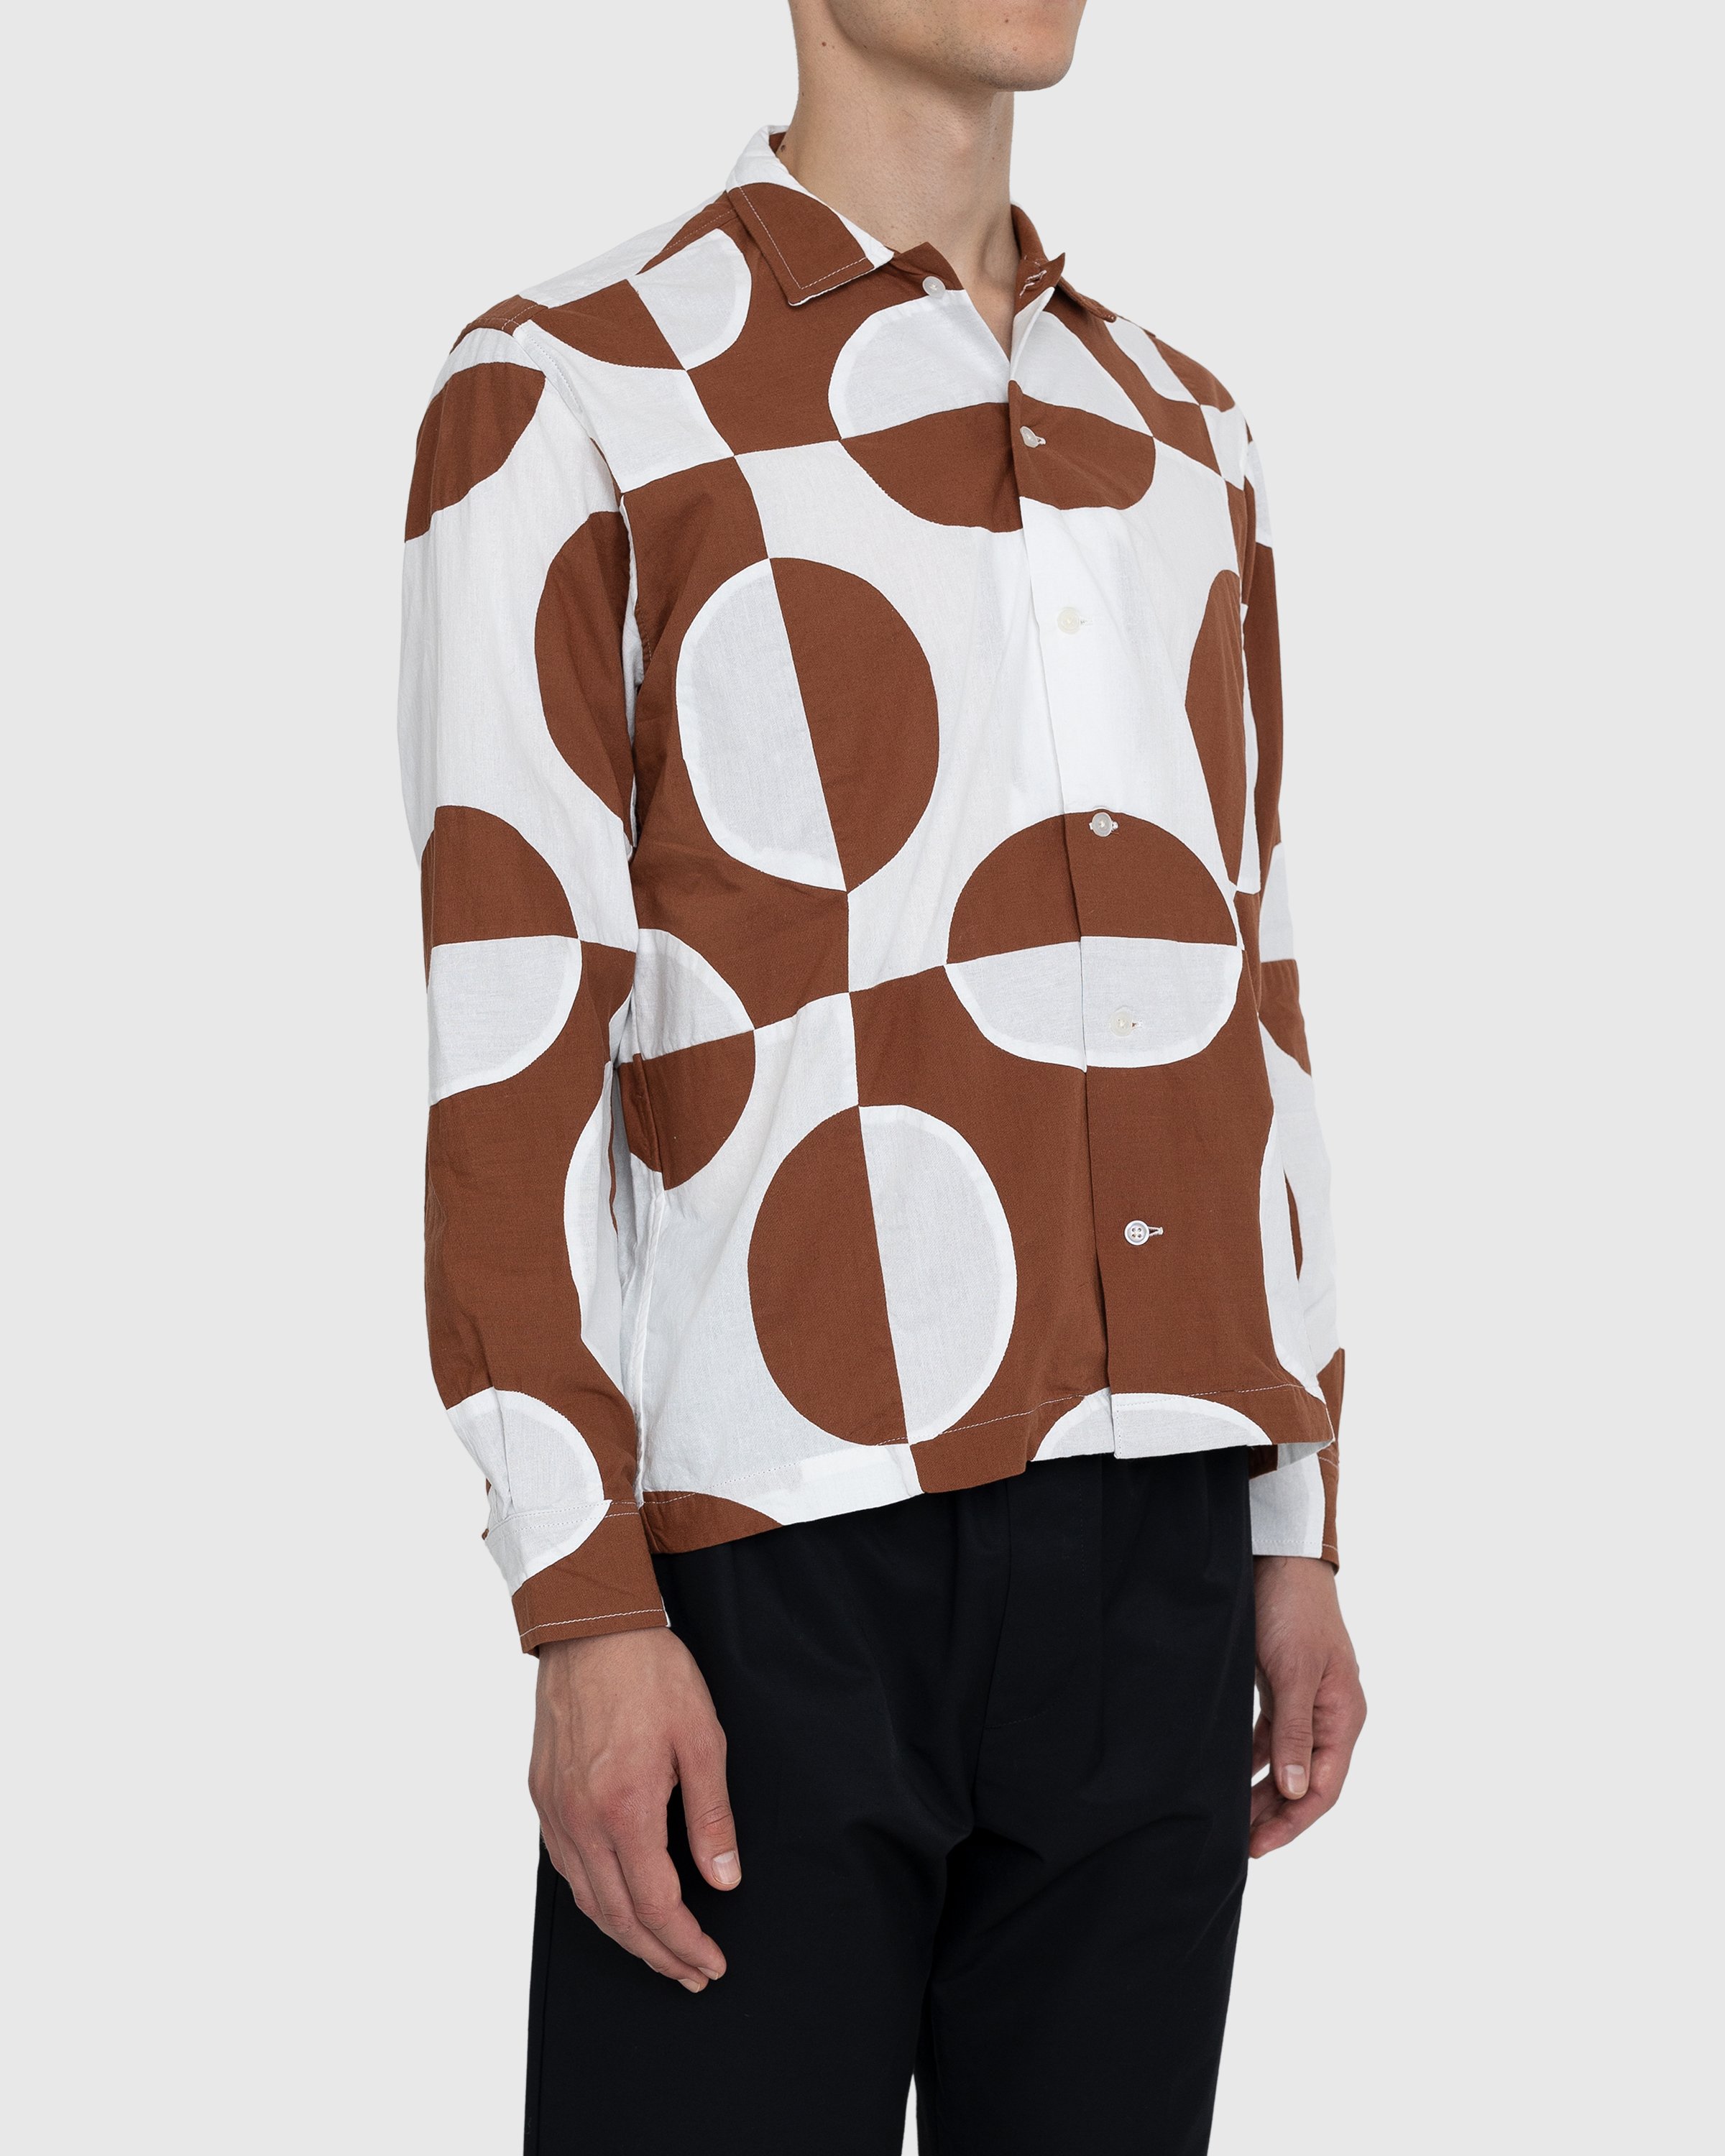 Bode - Duo Oval Patchwork Long-Sleeve Shirt Brown - Clothing - Multi - Image 3